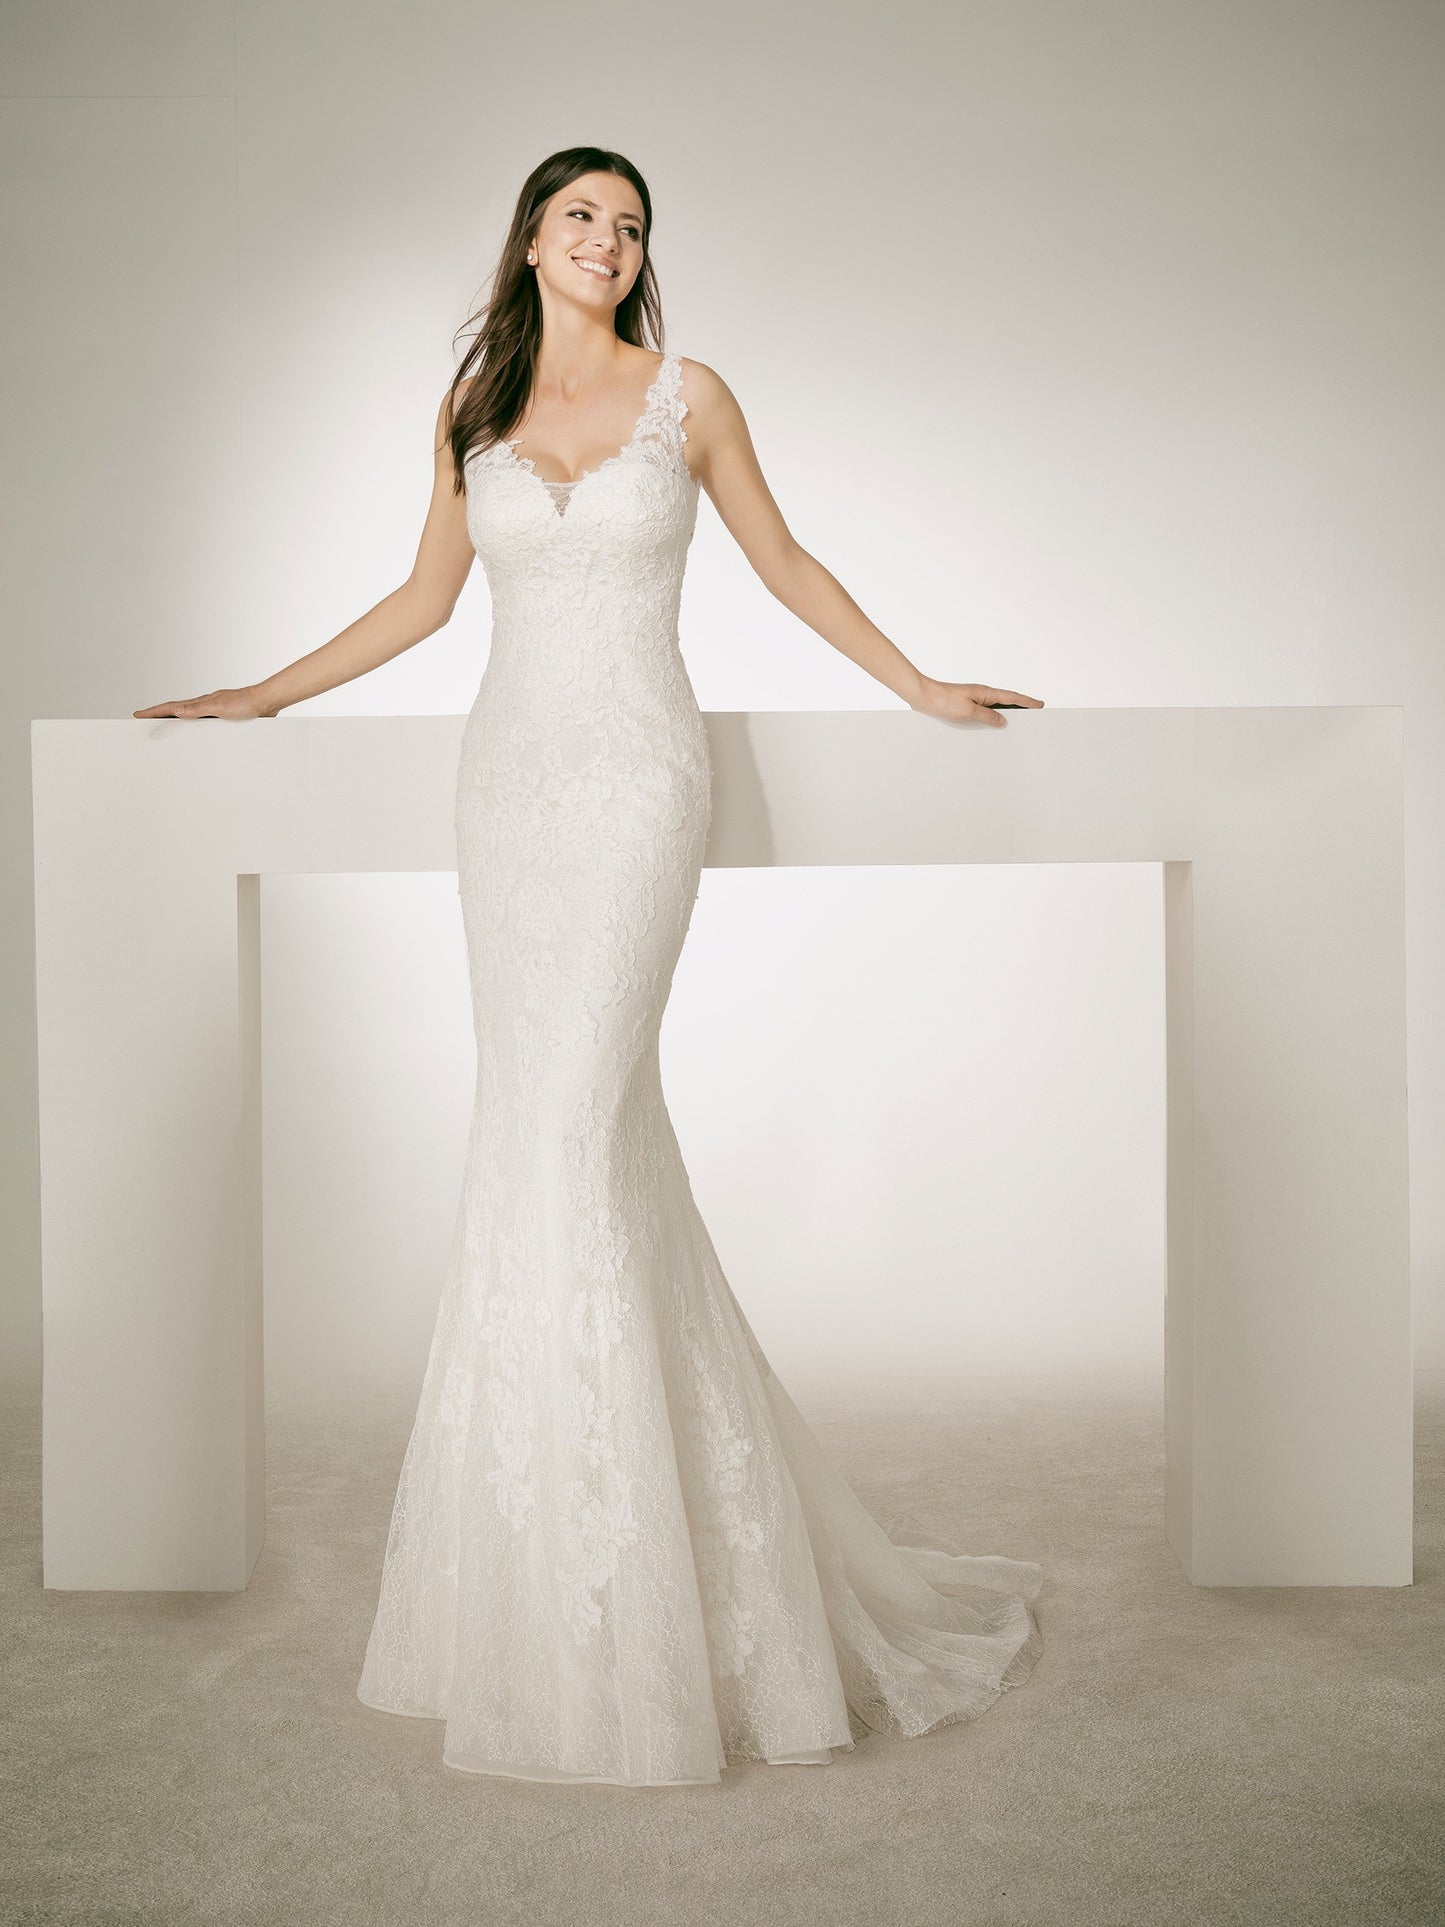 White One Bridal CHRIS is a long Lace Fitted Mermaid wedding Dress. Featuring a Plunging V neckline and sheer lace straps.  IN STOCK FOR IMMEDIATE DELIVERY  US SIZE 10 - OFF WHITE